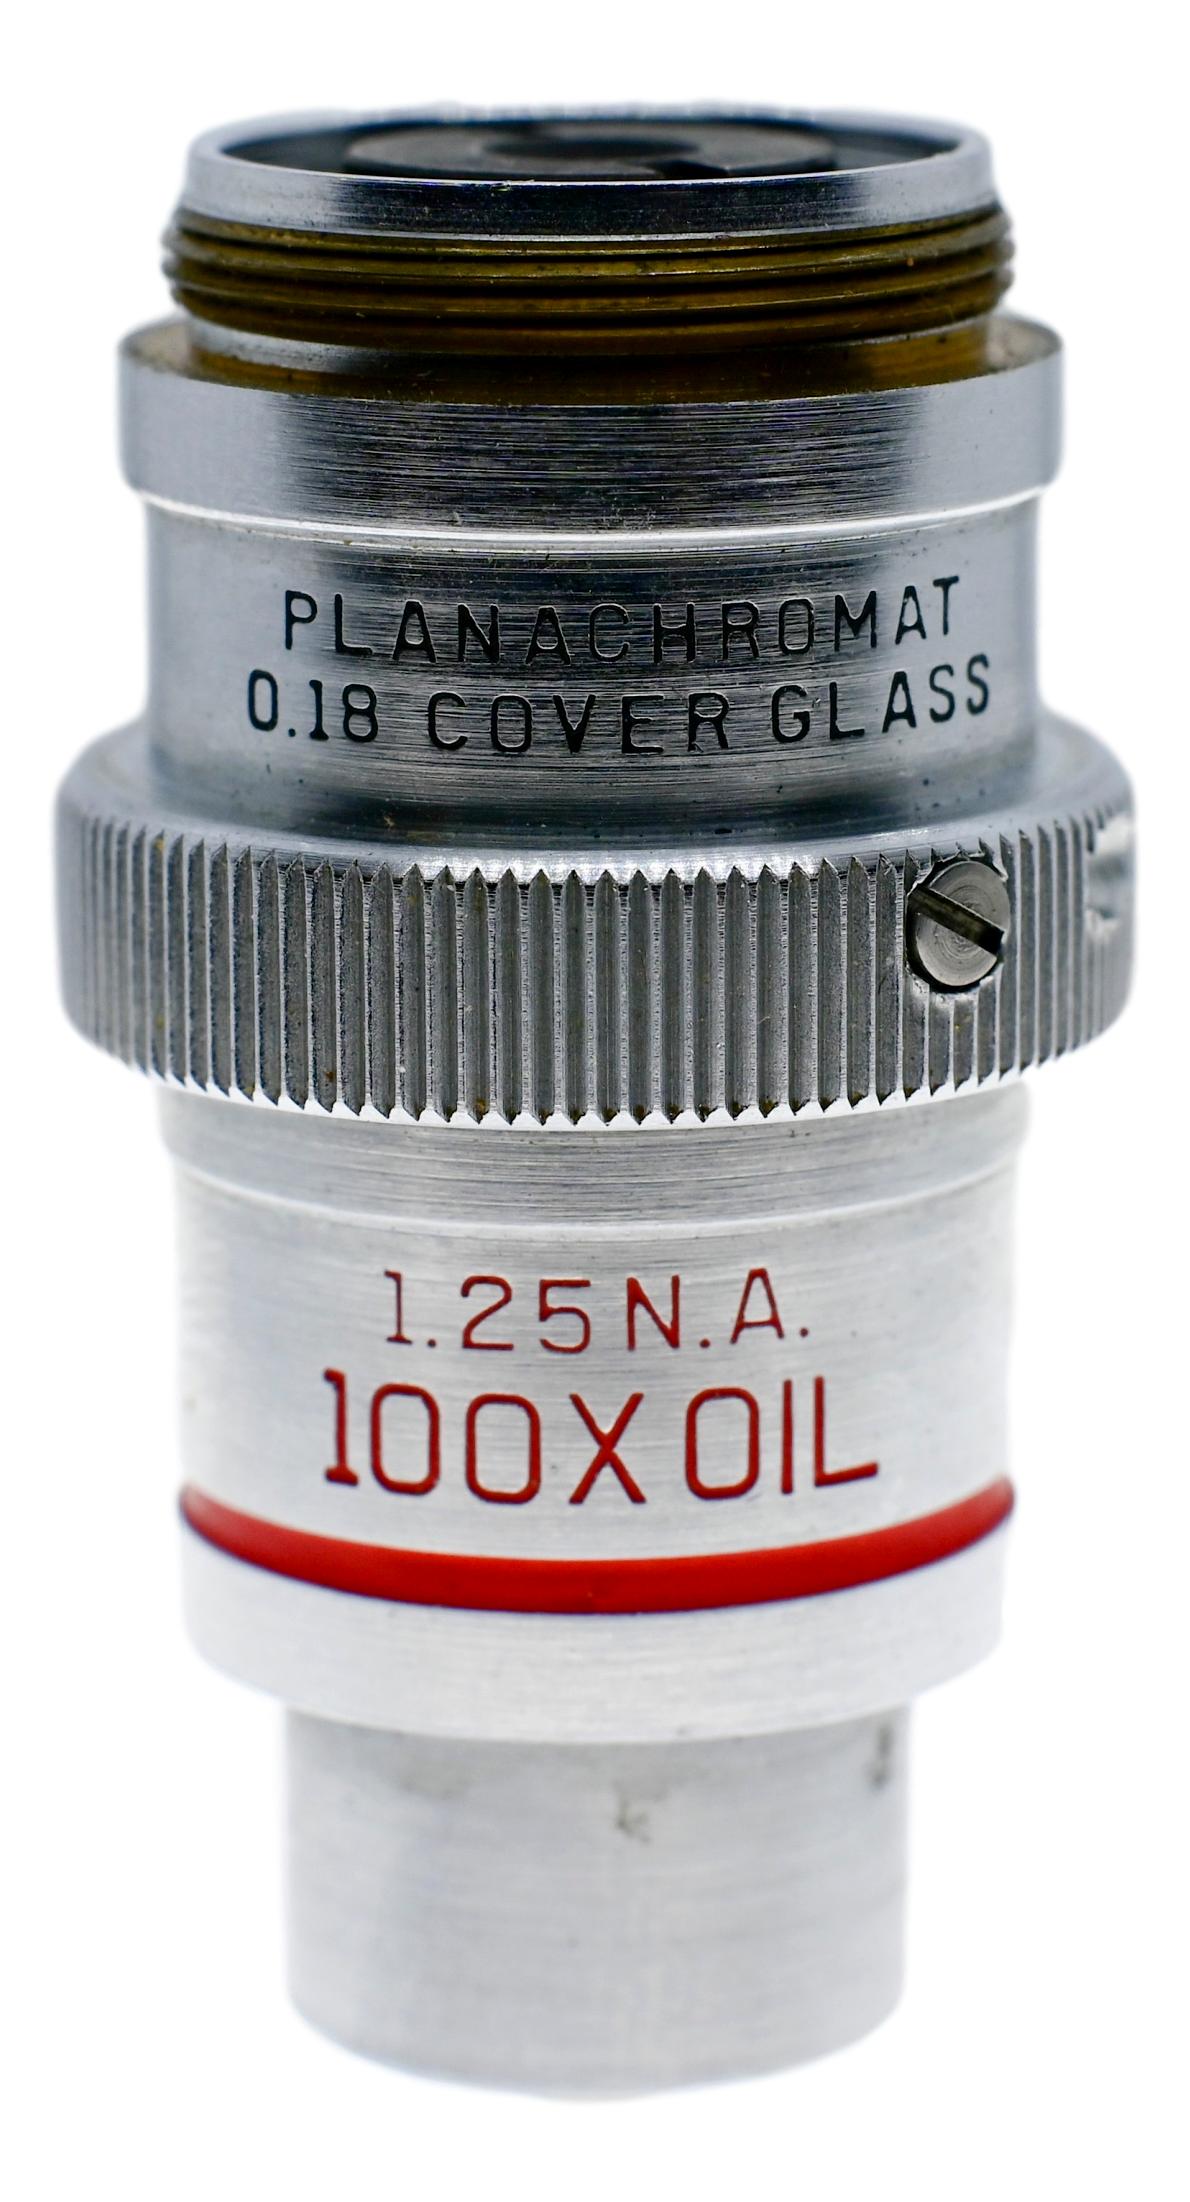 Bausch & Lomb 100x PlanAchromat Phase Contrast Oil Objective